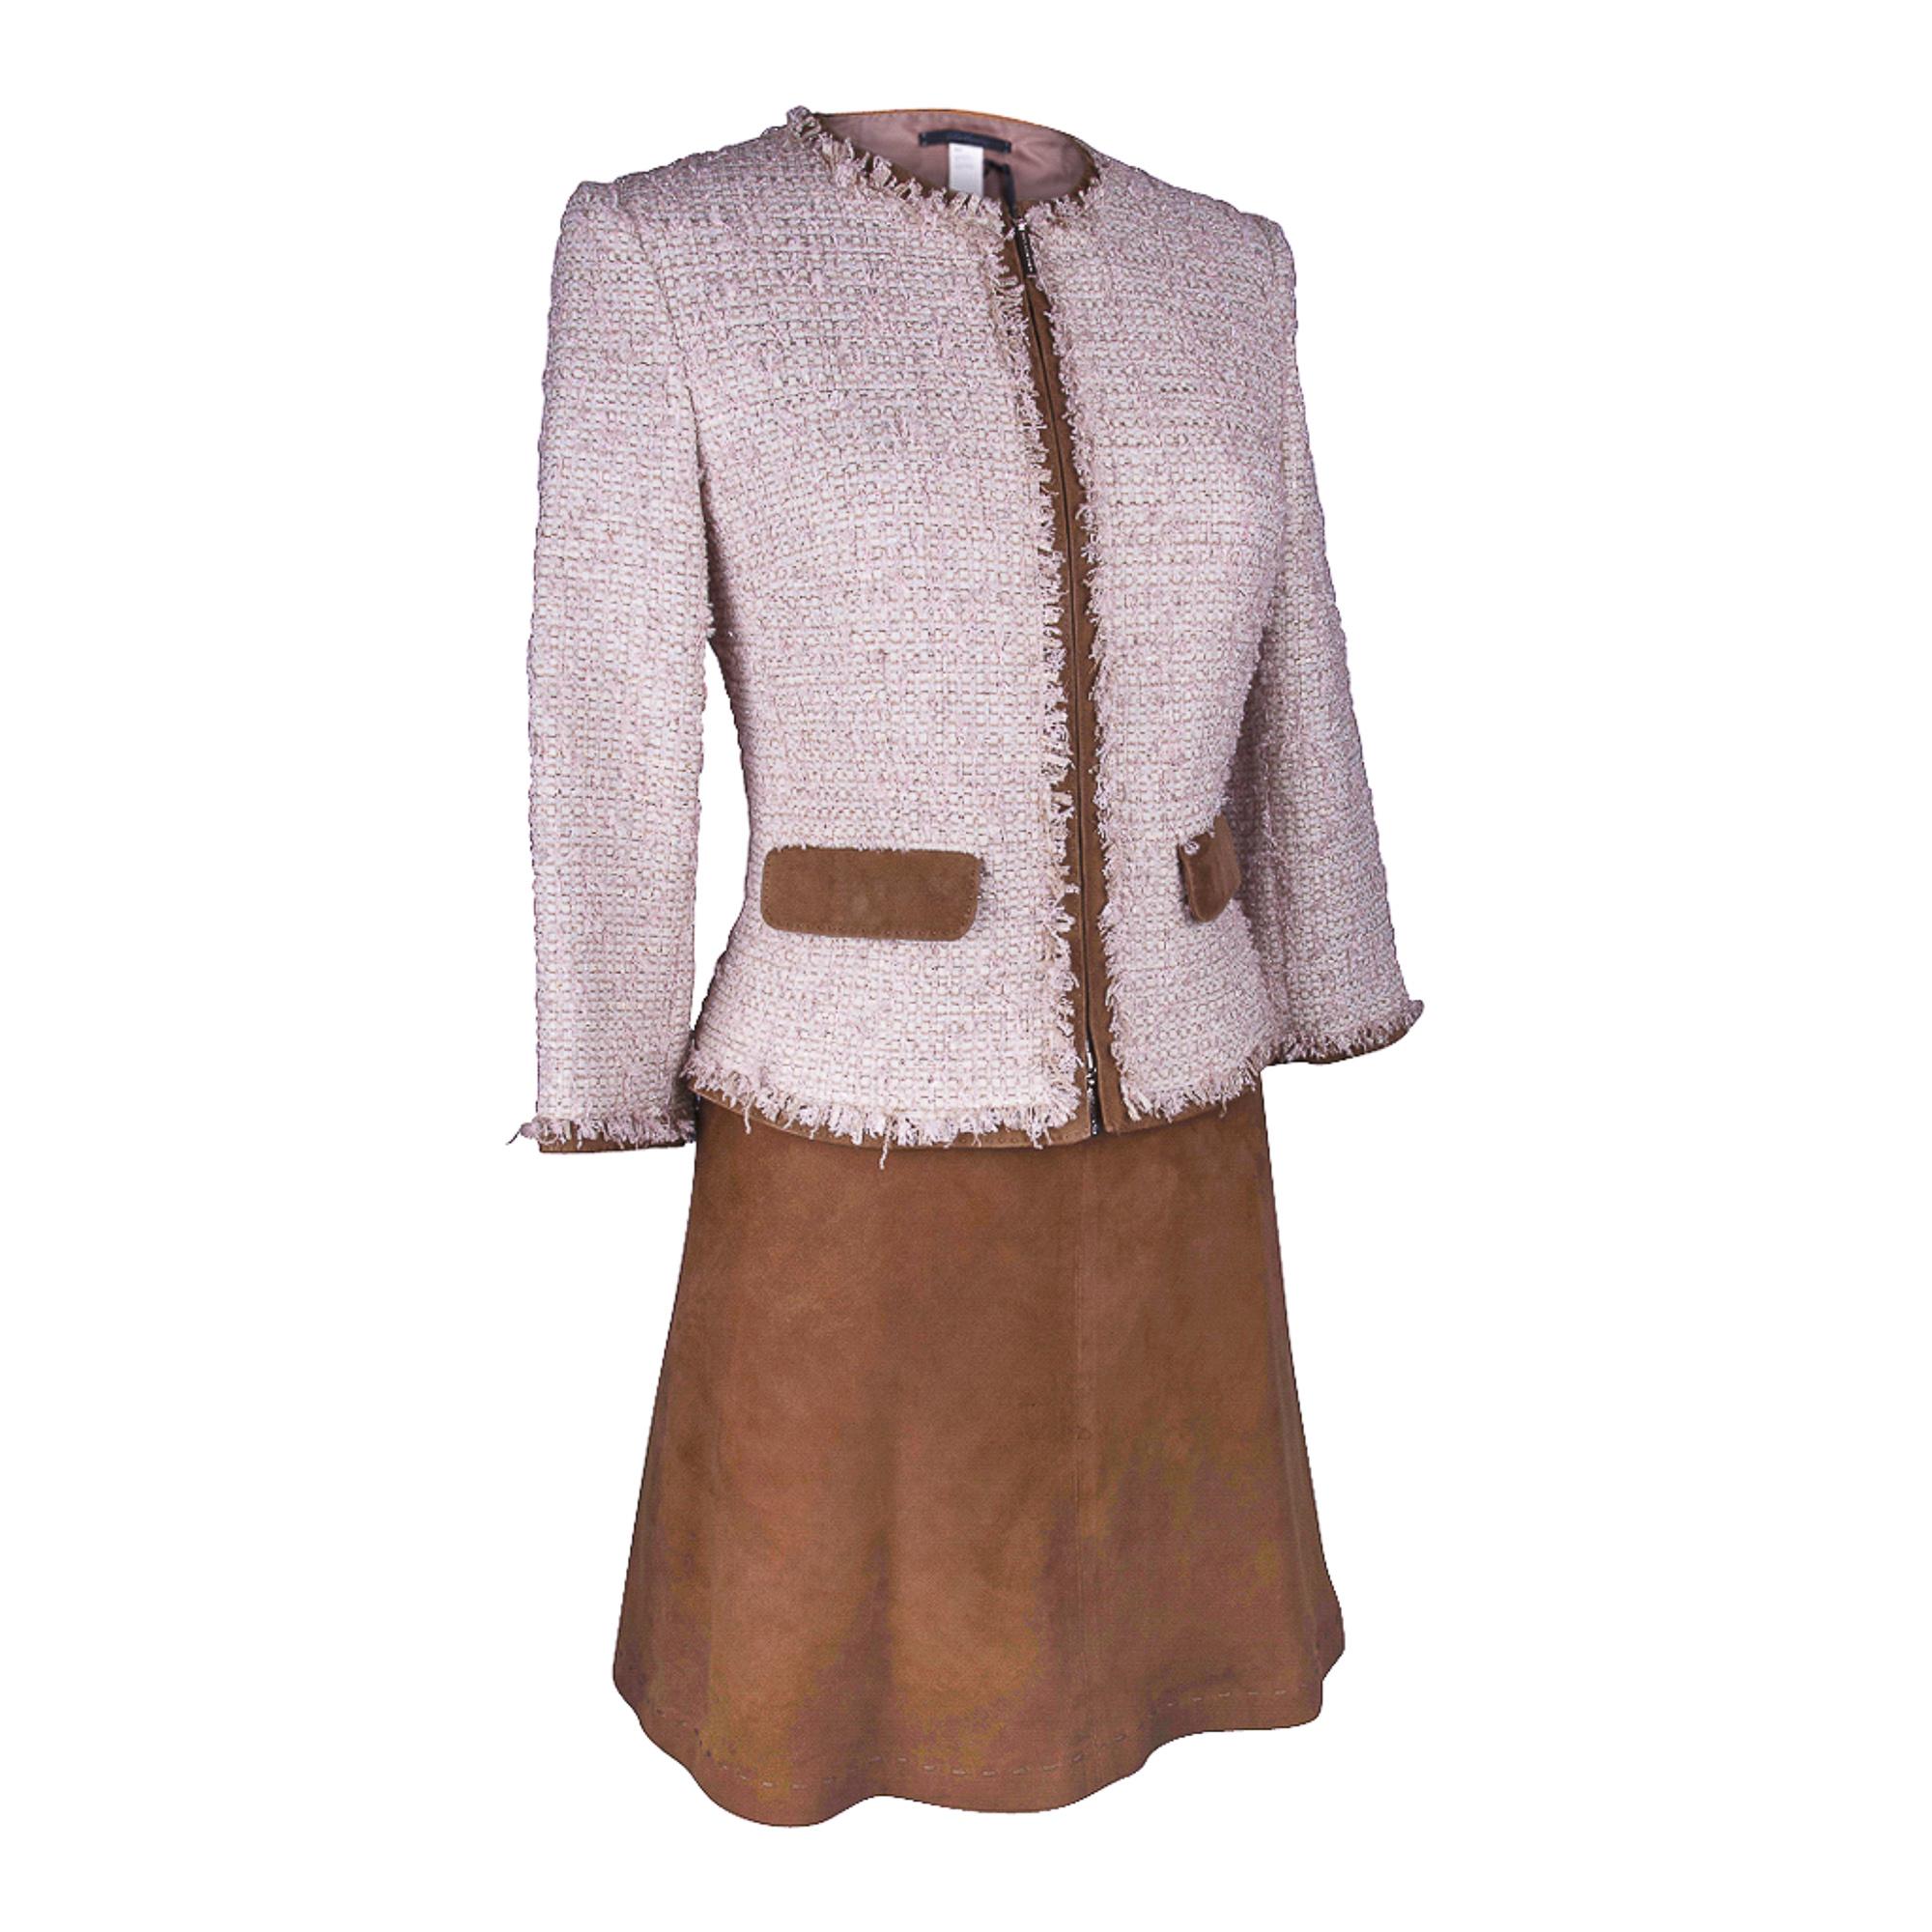 Les Copains Jacket Pink Fantasy Tweed Suede Edging Skirt Set 6 New In New Condition For Sale In Miami, FL